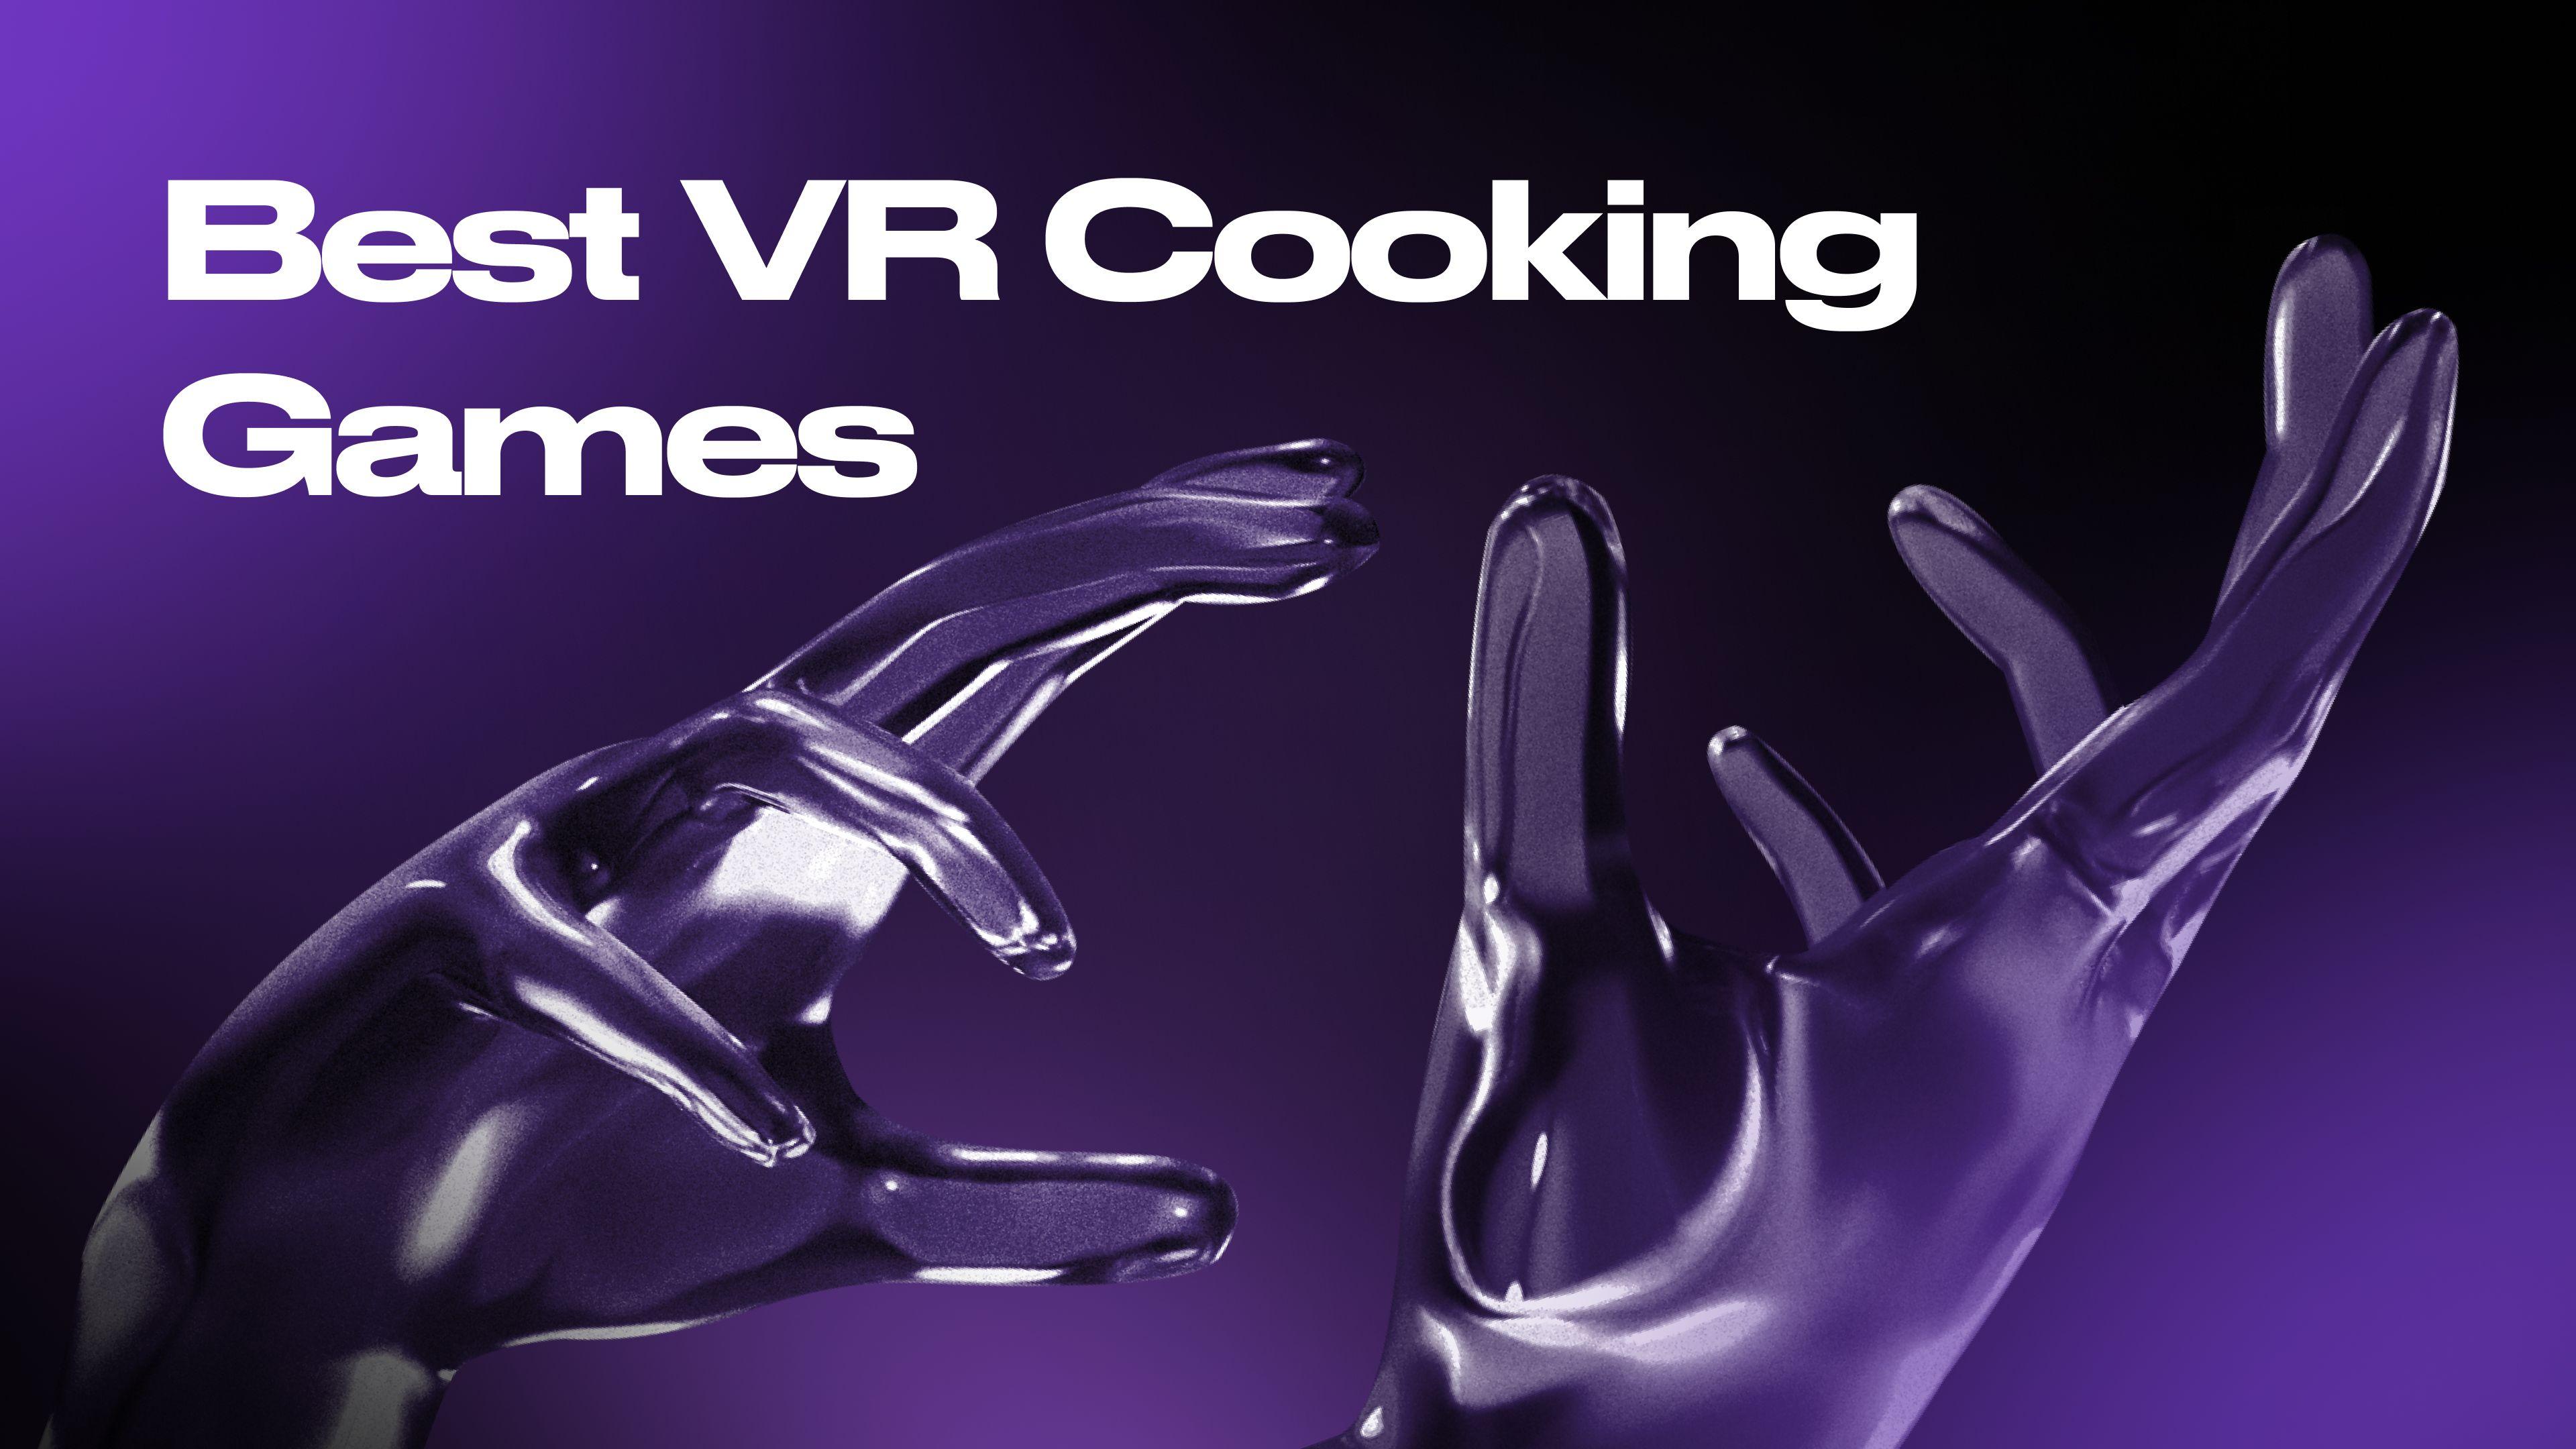 Cooking Simulator VR - VR Game of the Year